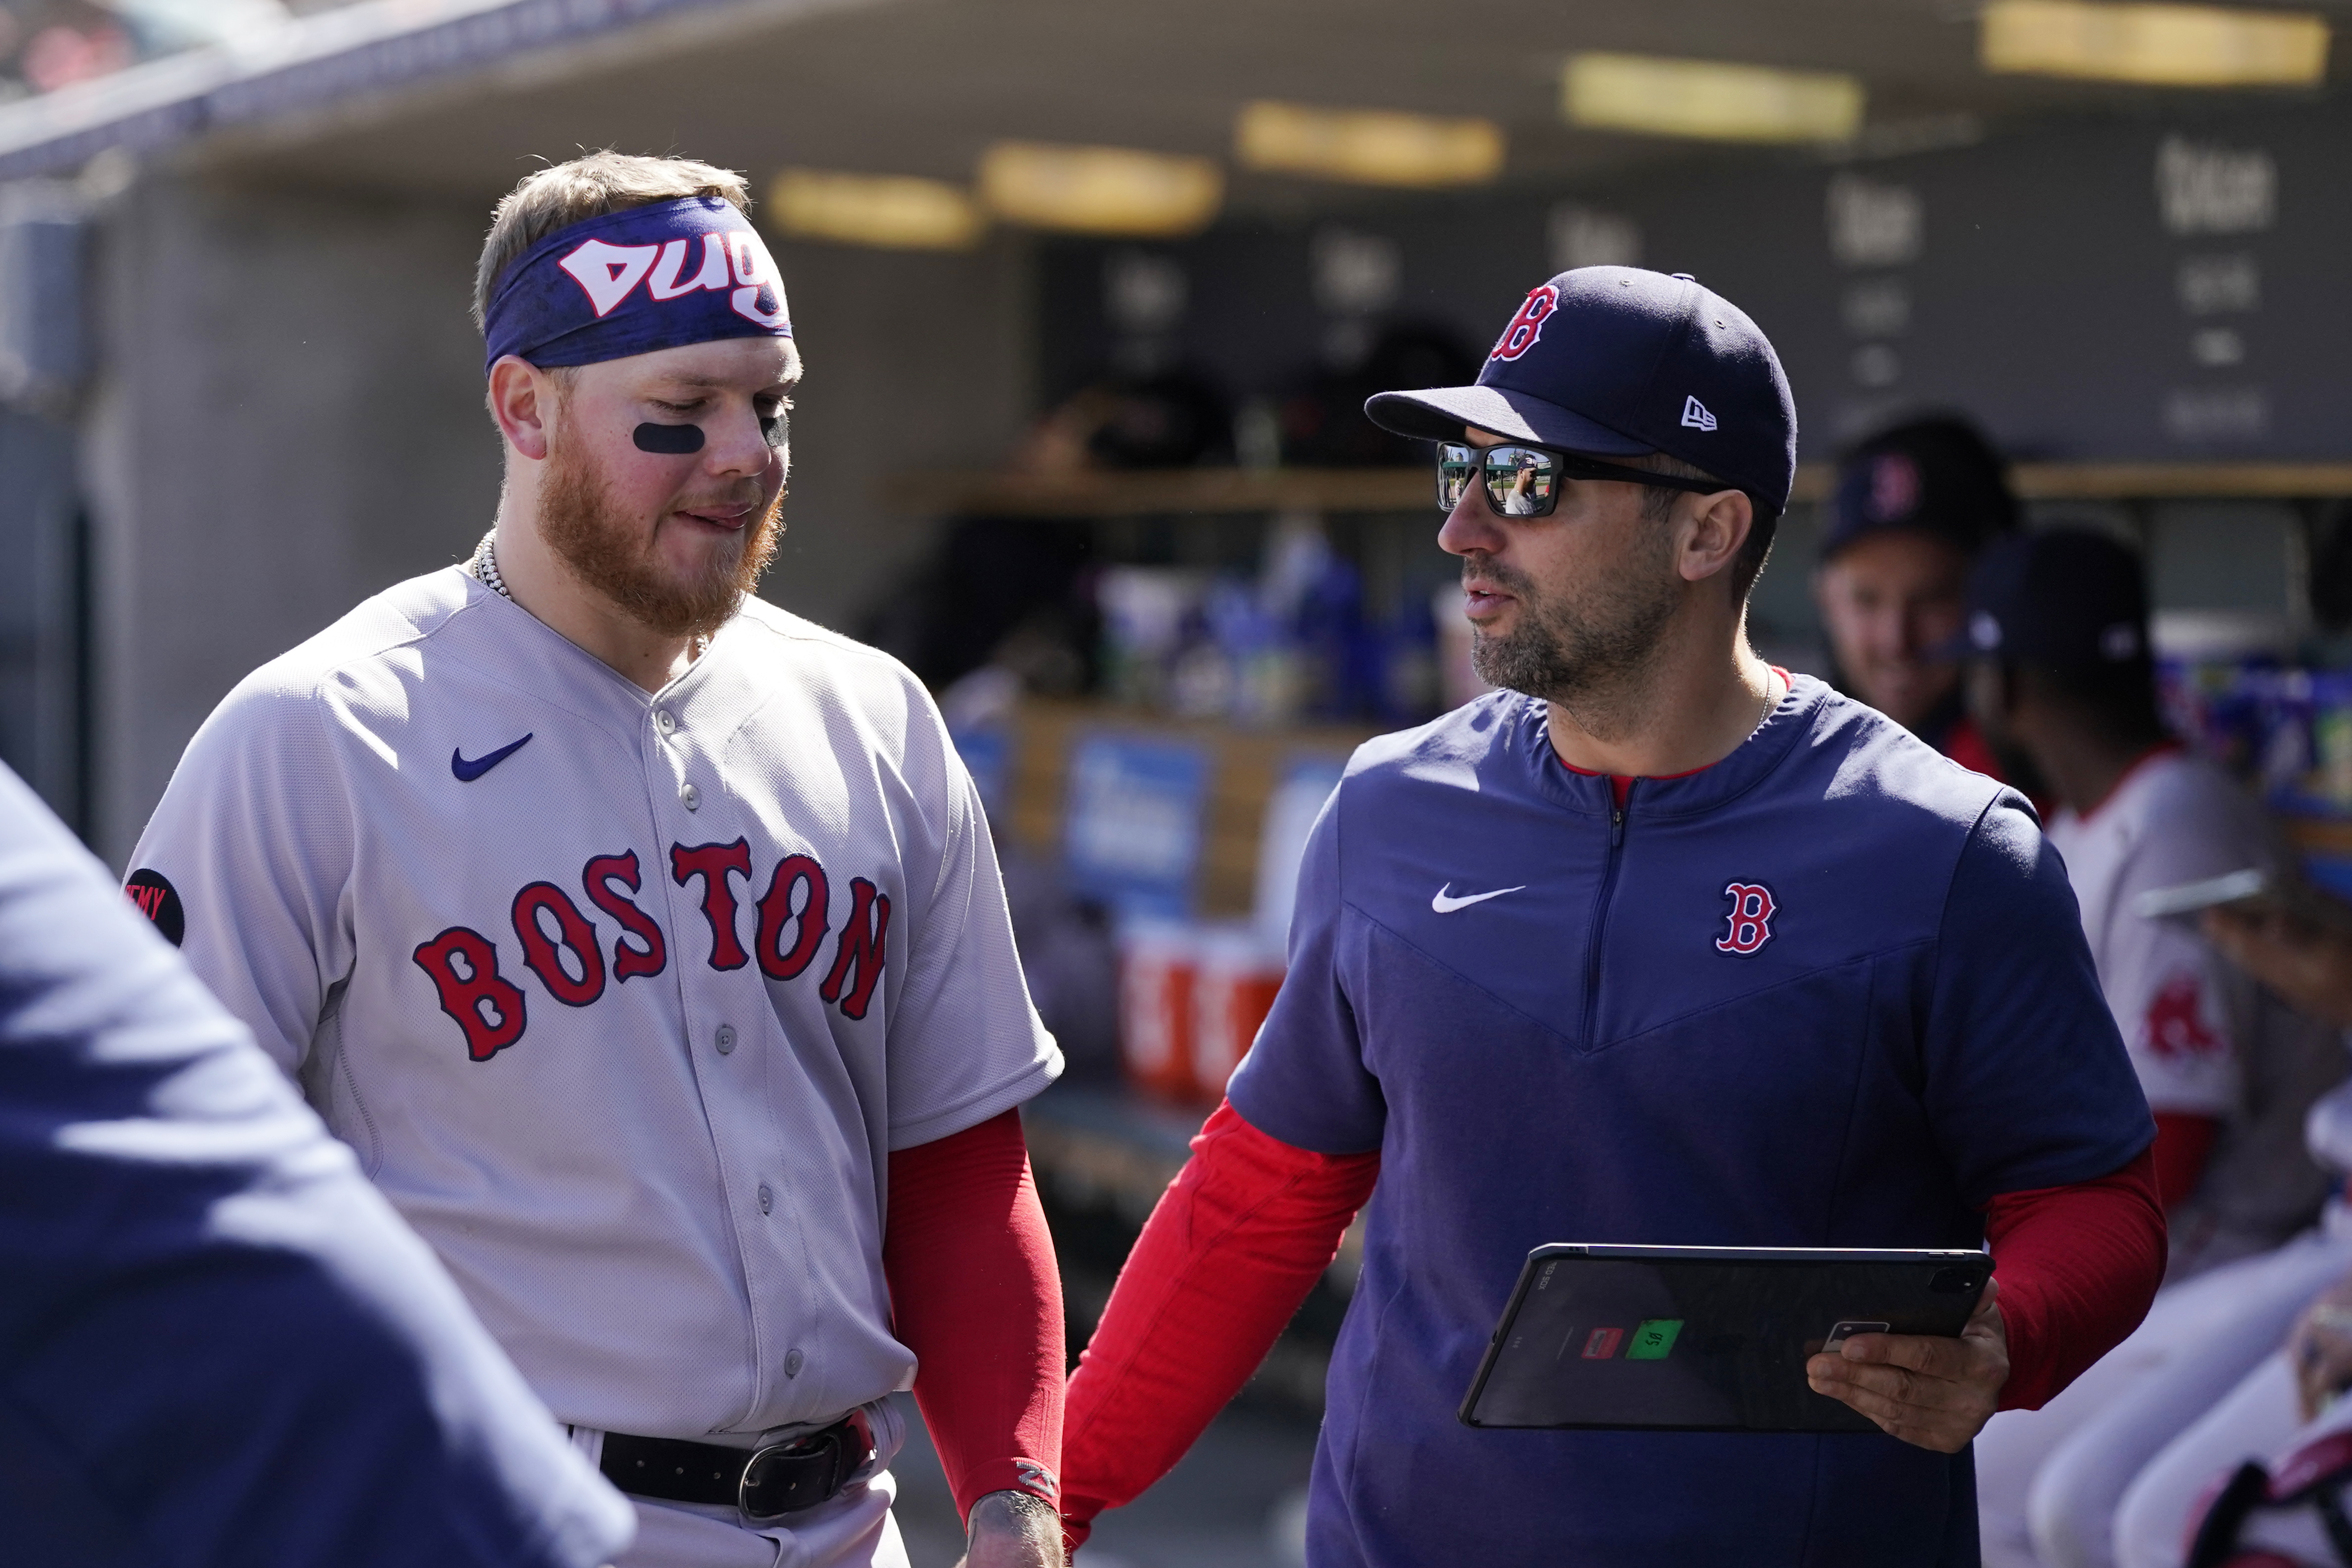 Red Sox Farm Report: Bobby Dalbec talks lessons from MLB, mental game, and  more